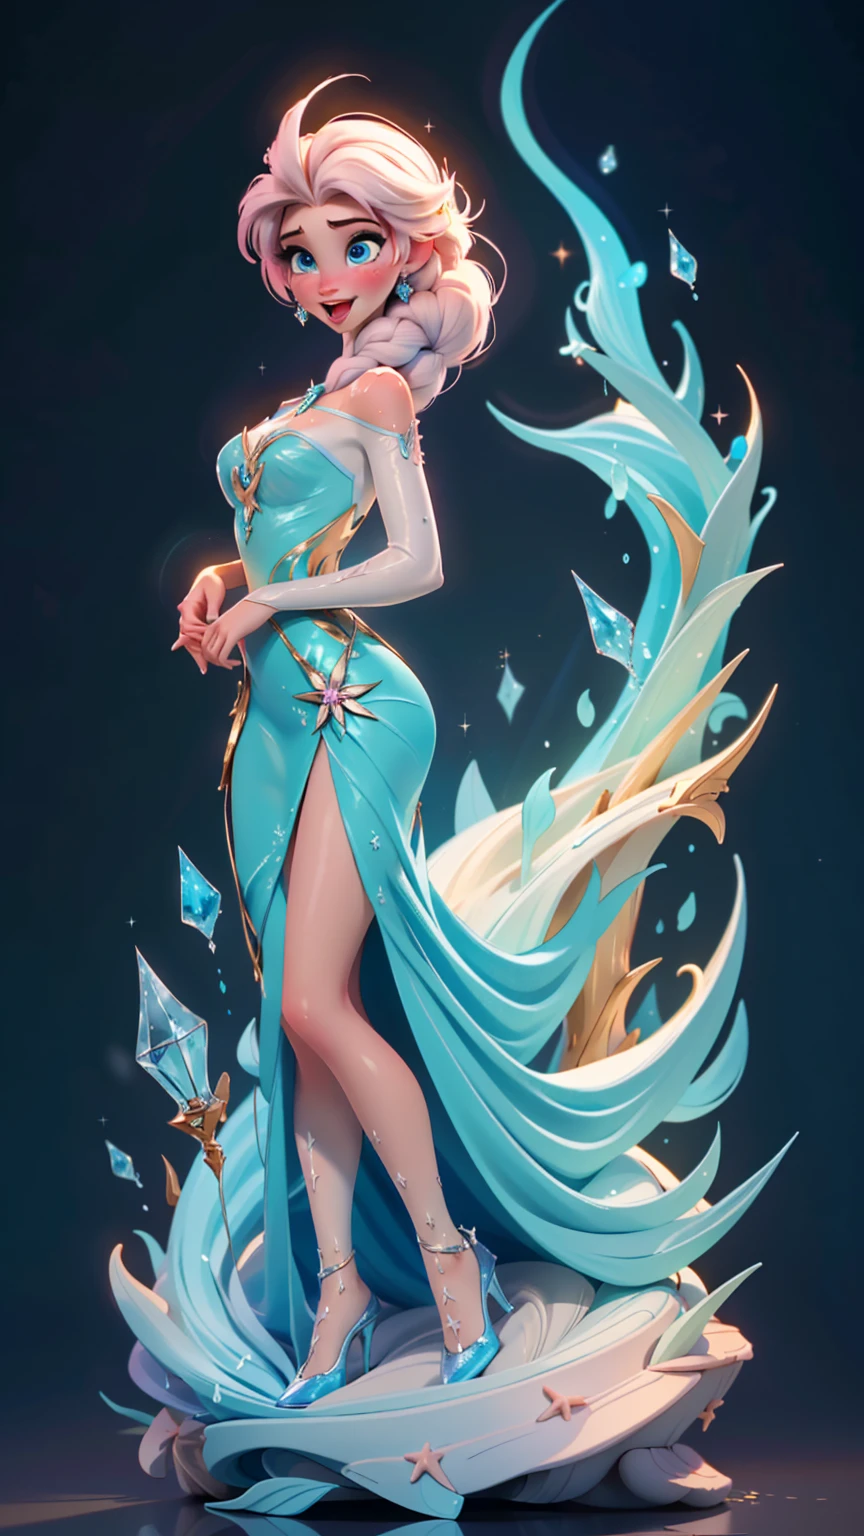 Elsa-Ariel Fusion, Merging models, melting, Ariel&#39;s clothes, 1girl, Beautiful, character, Woman, female, beachfront, (master part:1.2), (best qualityer:1.2), (standing alone:1.2), ((struggling pose)), ((field of battle)), cinemactic, perfects eyes, perfect  skin, perfect lighting, sorrido, Lumiere, Farbe, texturized skin, detail, Beauthfull, wonder wonder wonder wonder wonder wonder wonder wonder wonder wonder wonder wonder wonder wonder wonder wonder wonder wonder wonder wonder wonder wonder wonder wonder wonder wonder wonder wonder wonder wonder wonder wonder, ultra detali, face perfect, arousal, eyes roll, ((tongue out)), ((saliva dripping)), ahegao, A peace sign with hands